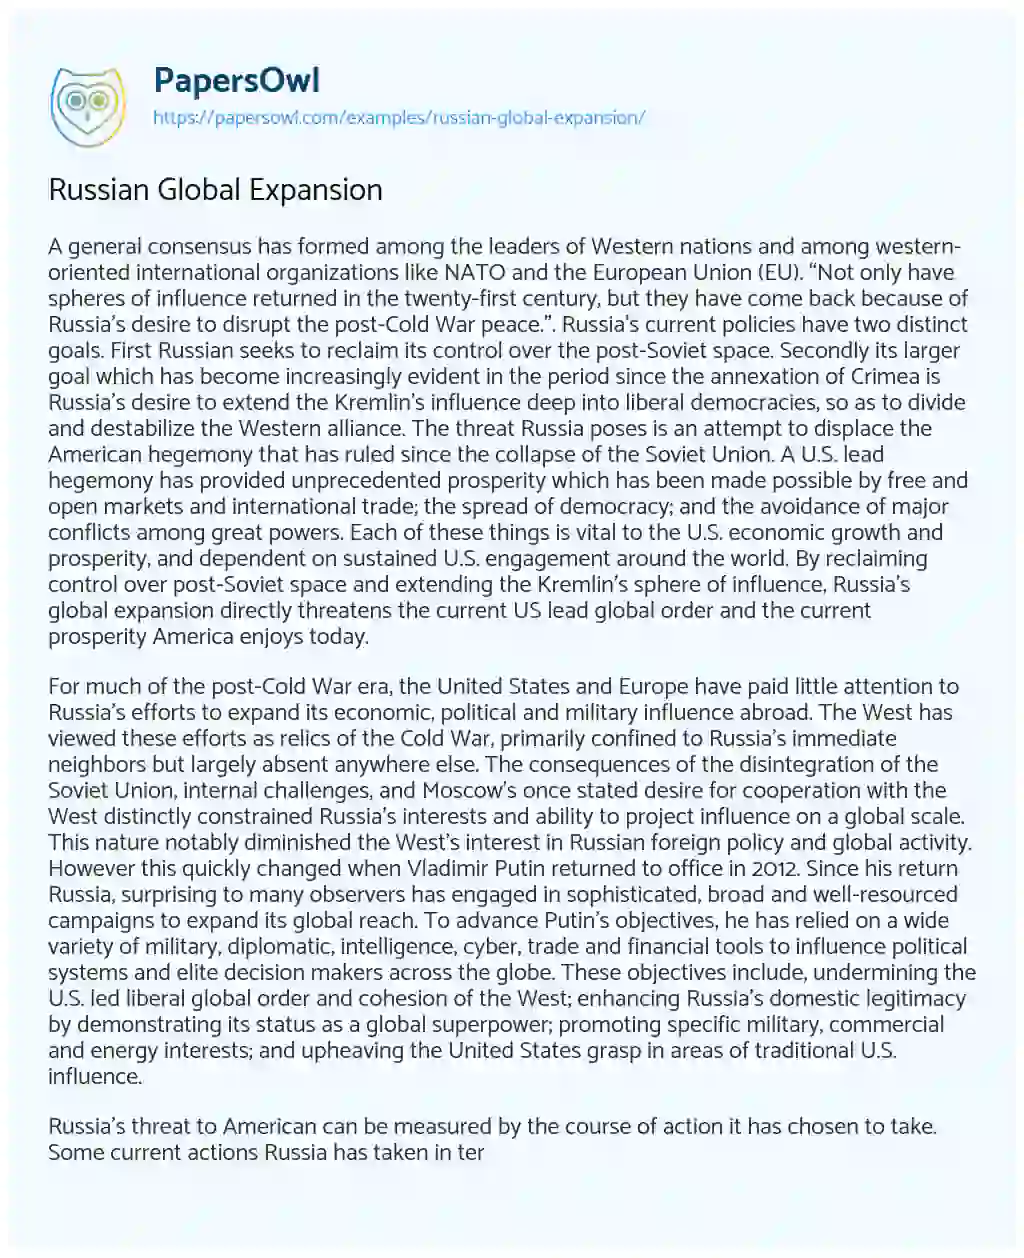 Essay on Russian Global Expansion